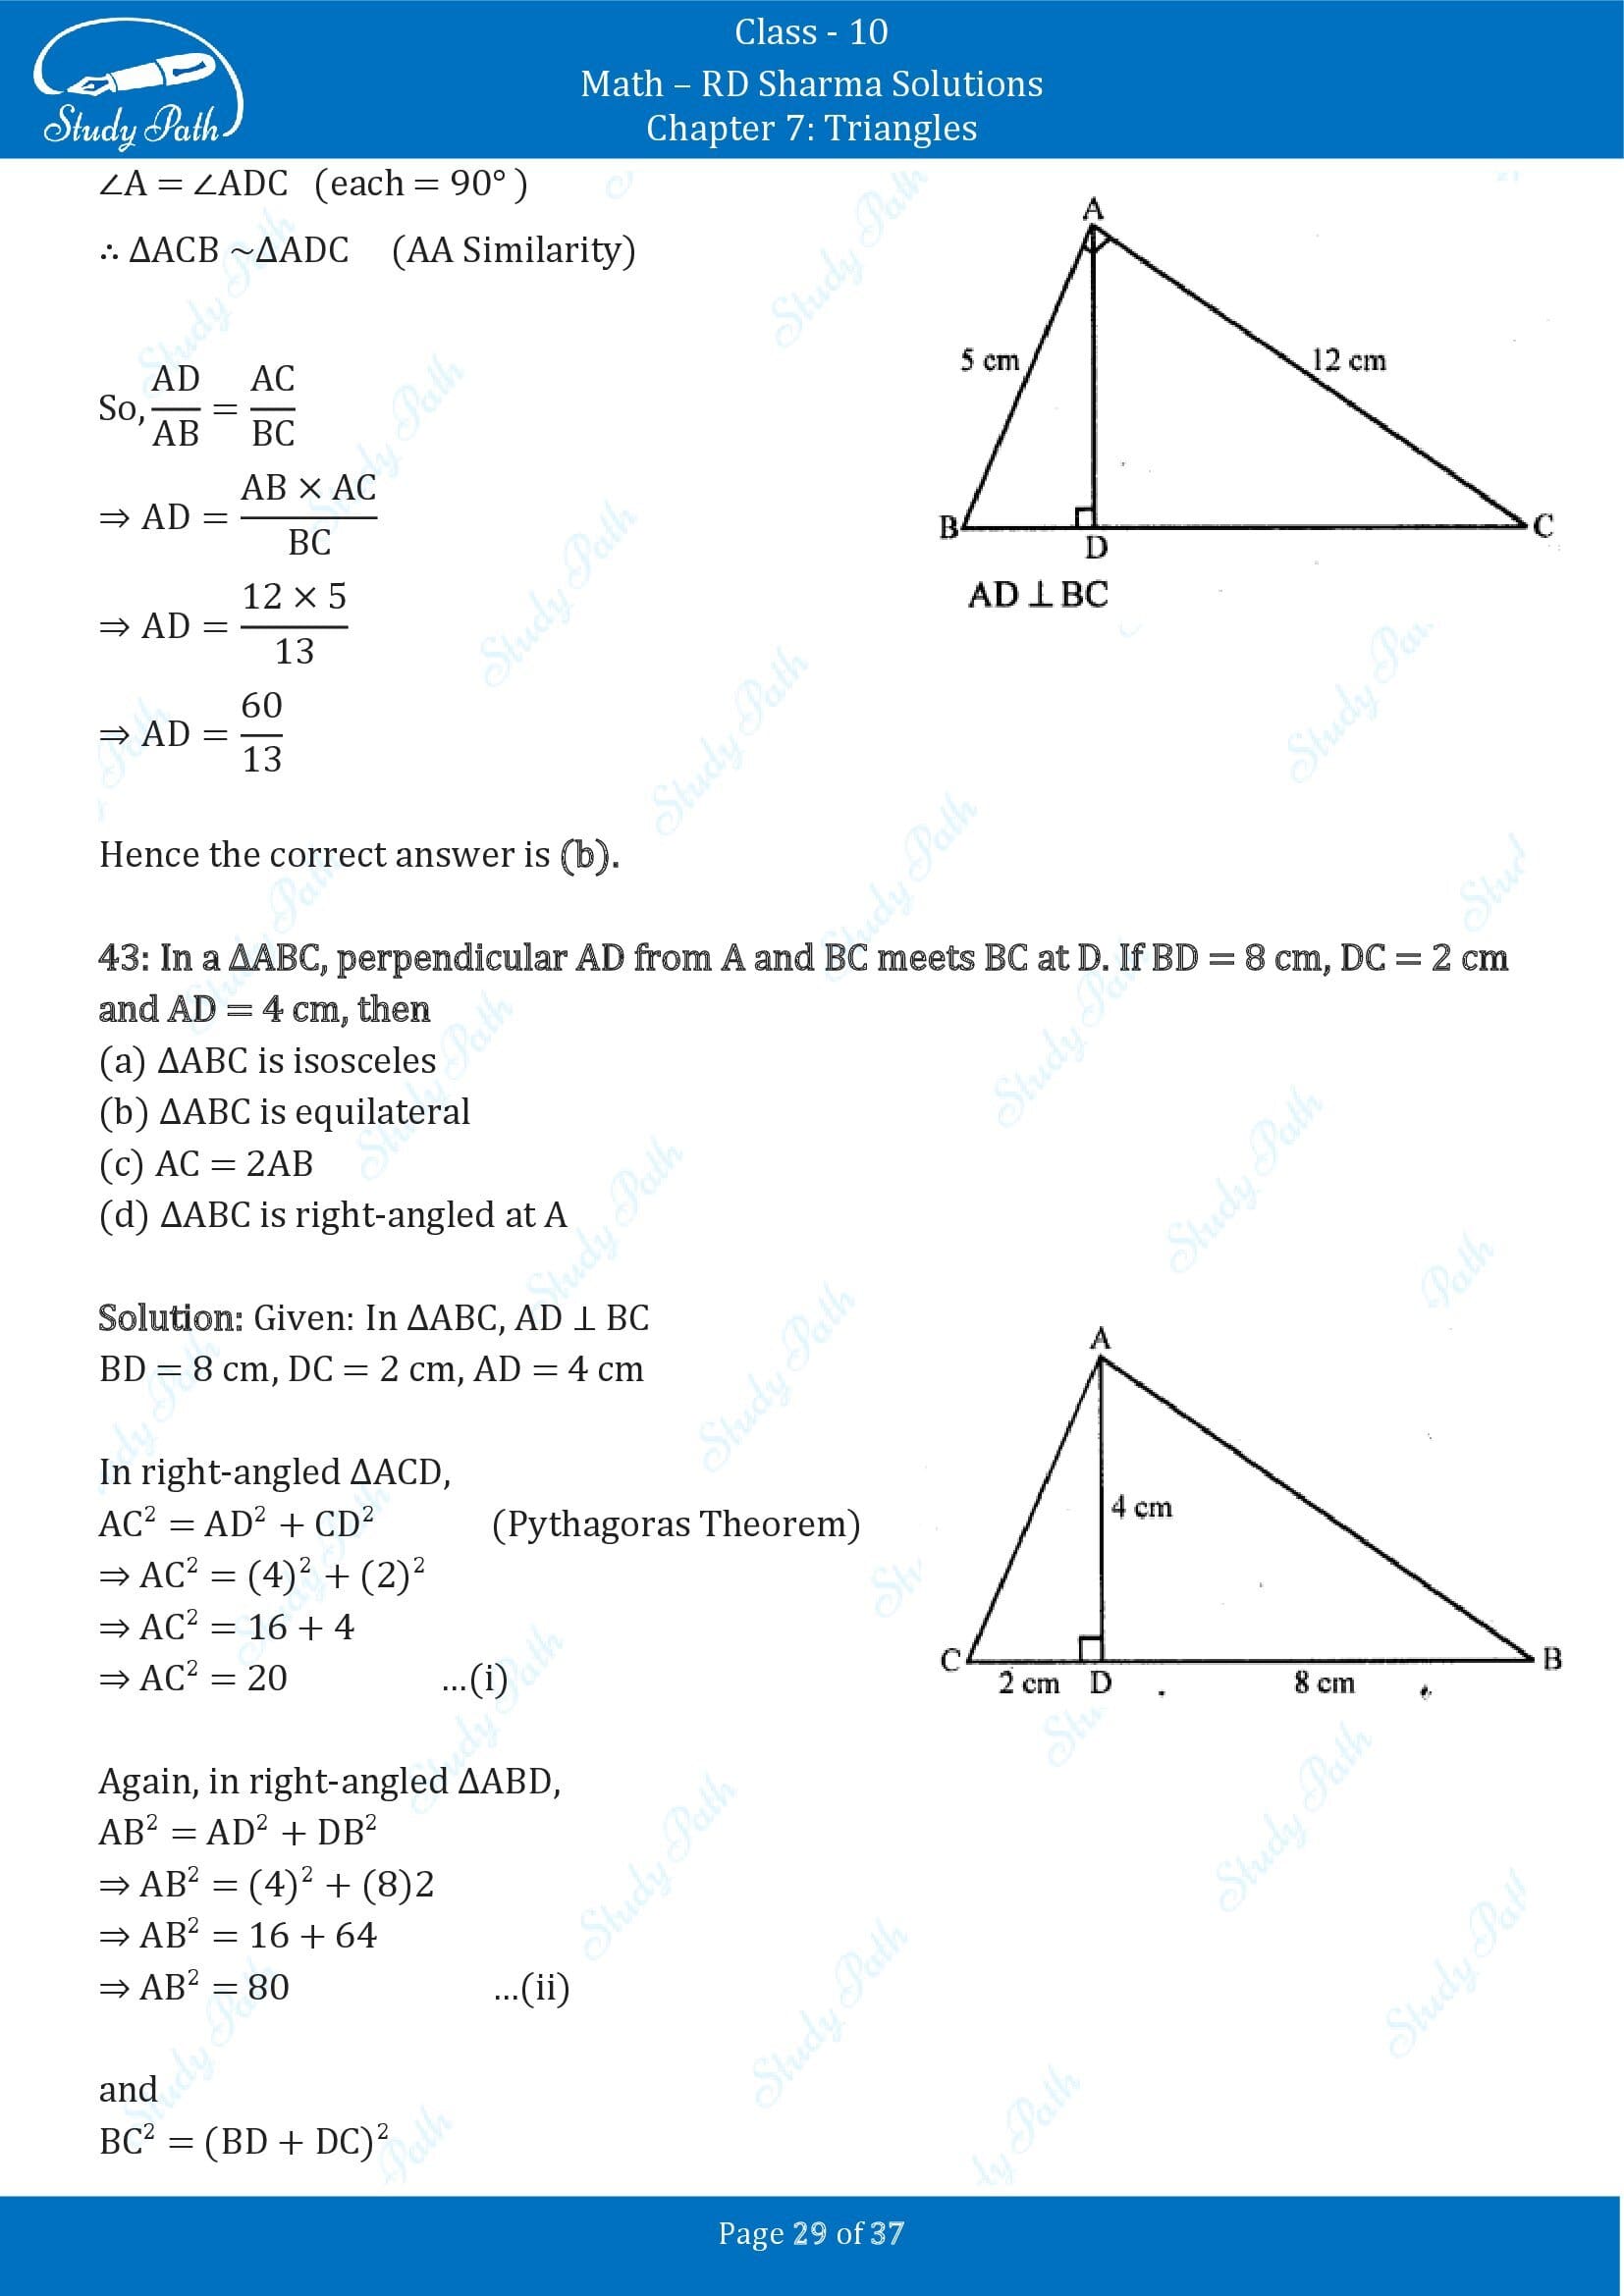 RD Sharma Solutions Class 10 Chapter 7 Triangles Multiple Choice Question MCQs 00029